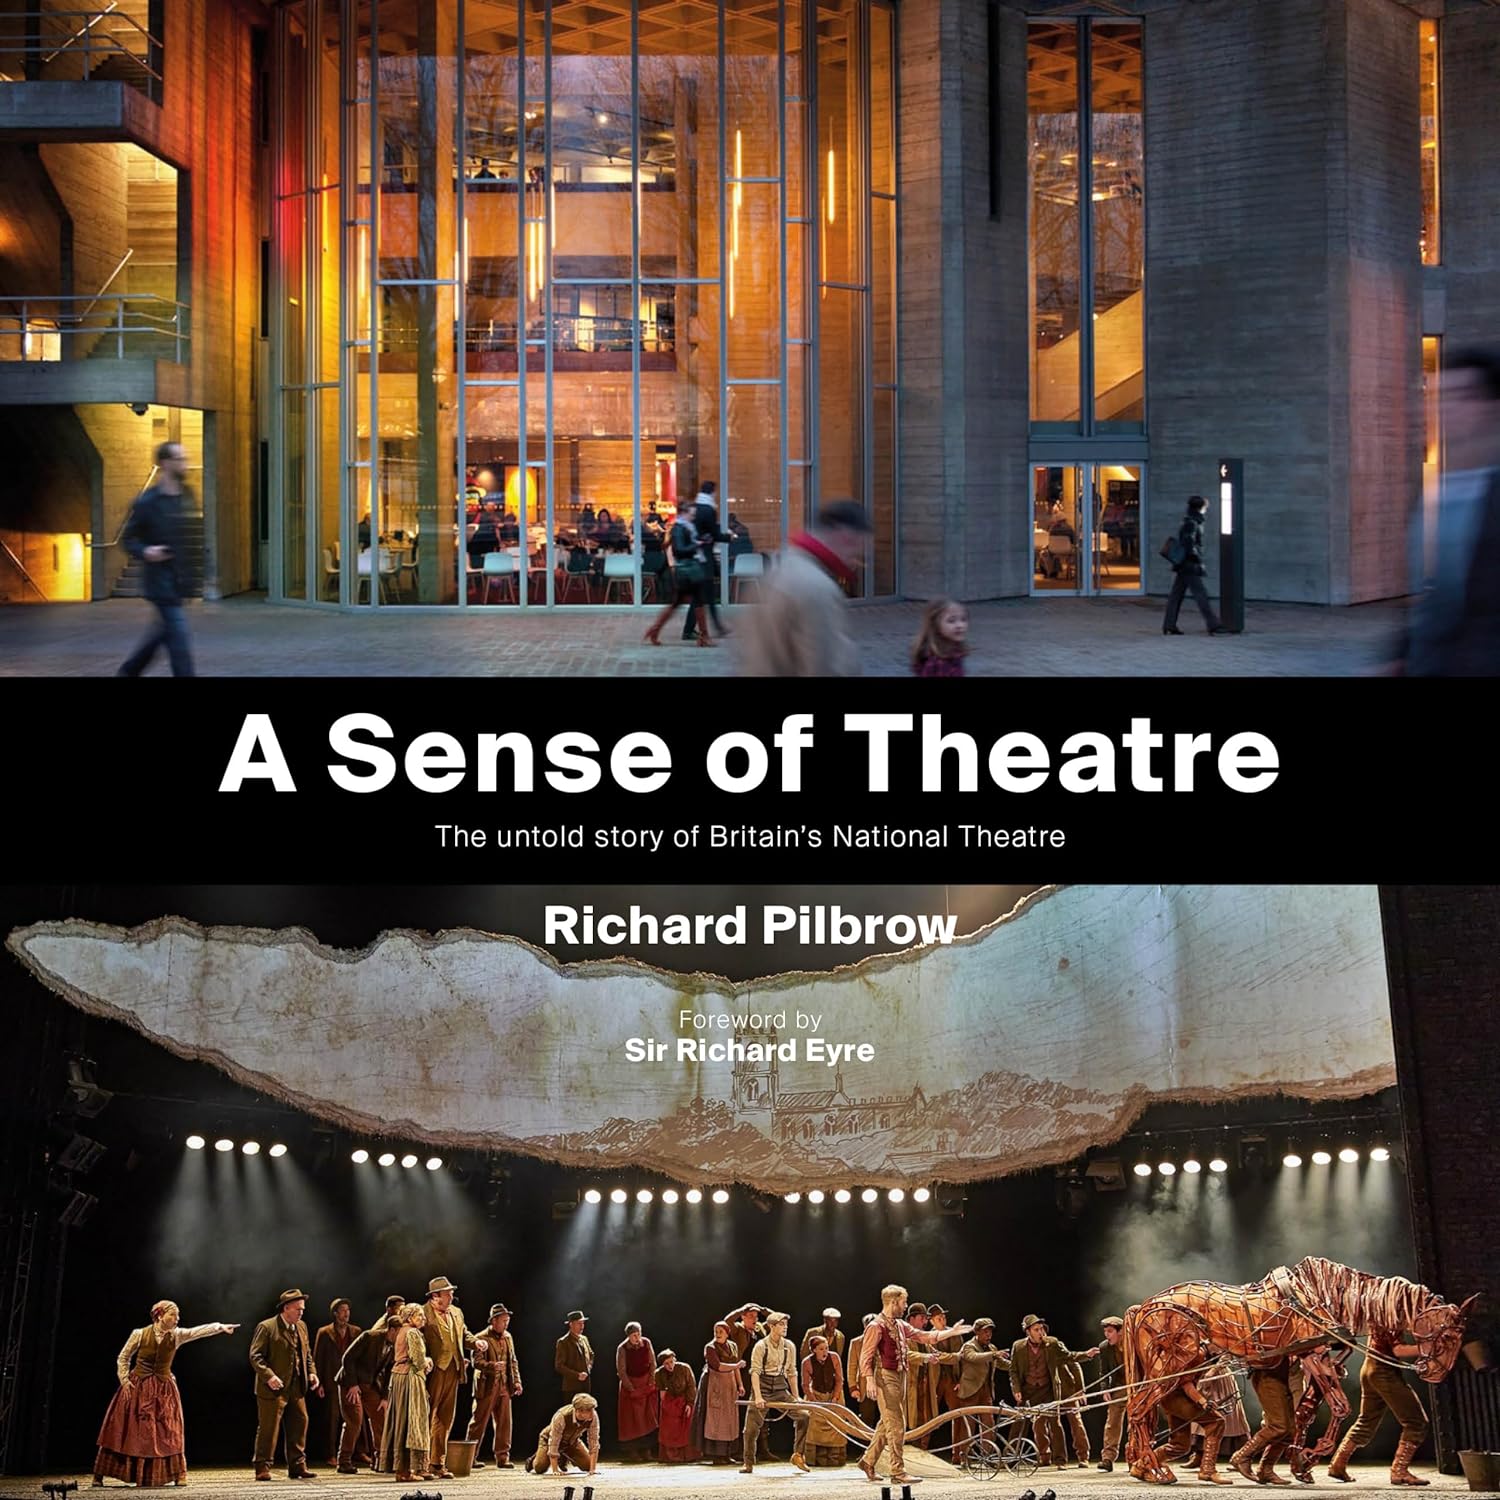 A Sense of Theatre: The Untold Stories of the Creation of Britain's National Theatre by Richard Pilbrow